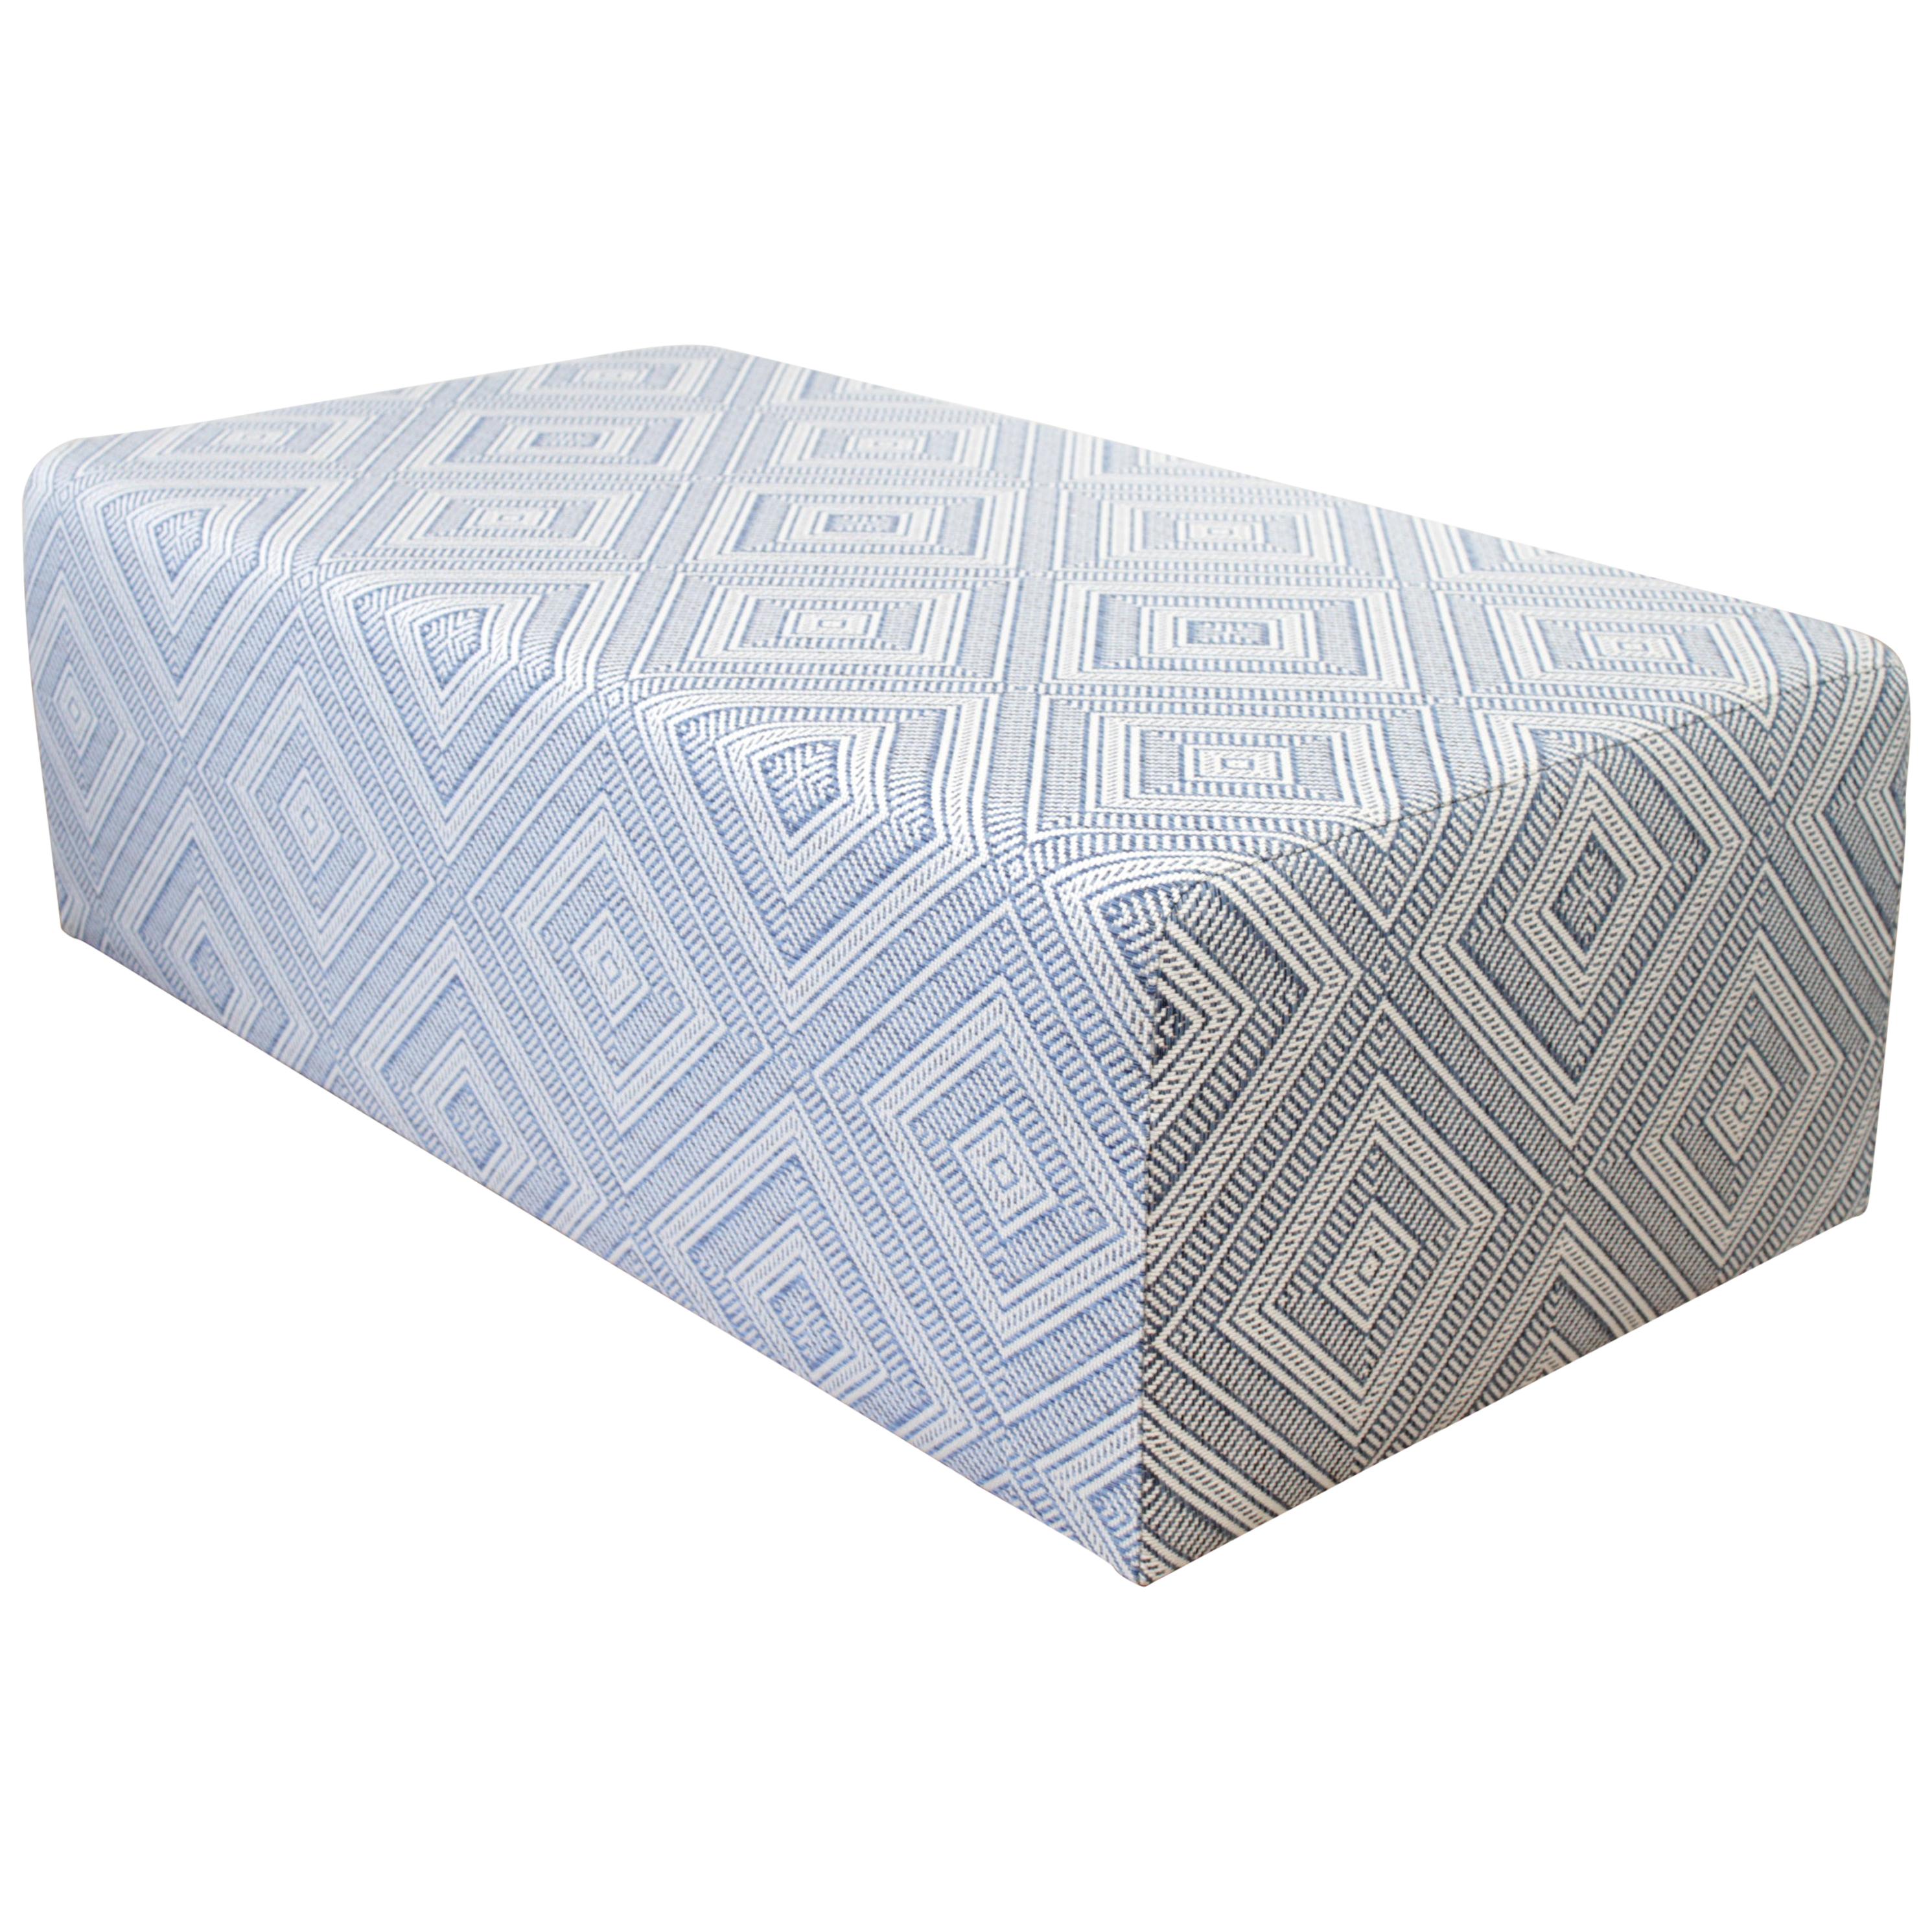 Custom Made Cube Cocktail Ottoman in Blue Diamond Fabric from France